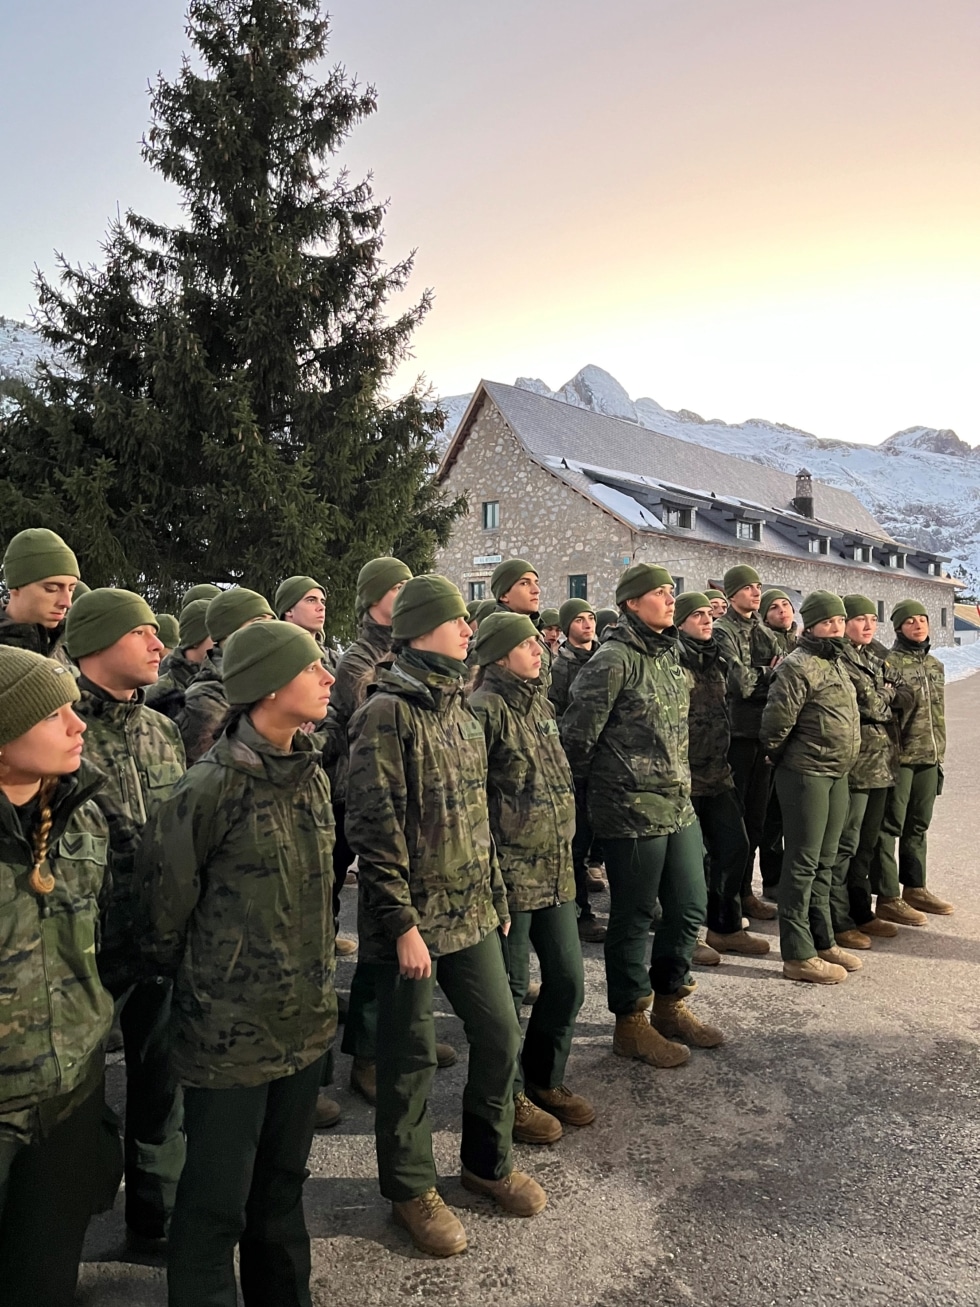 At dawn, the cadets of the Main Military Academy, among whom was Leonor, prepared to begin classes.